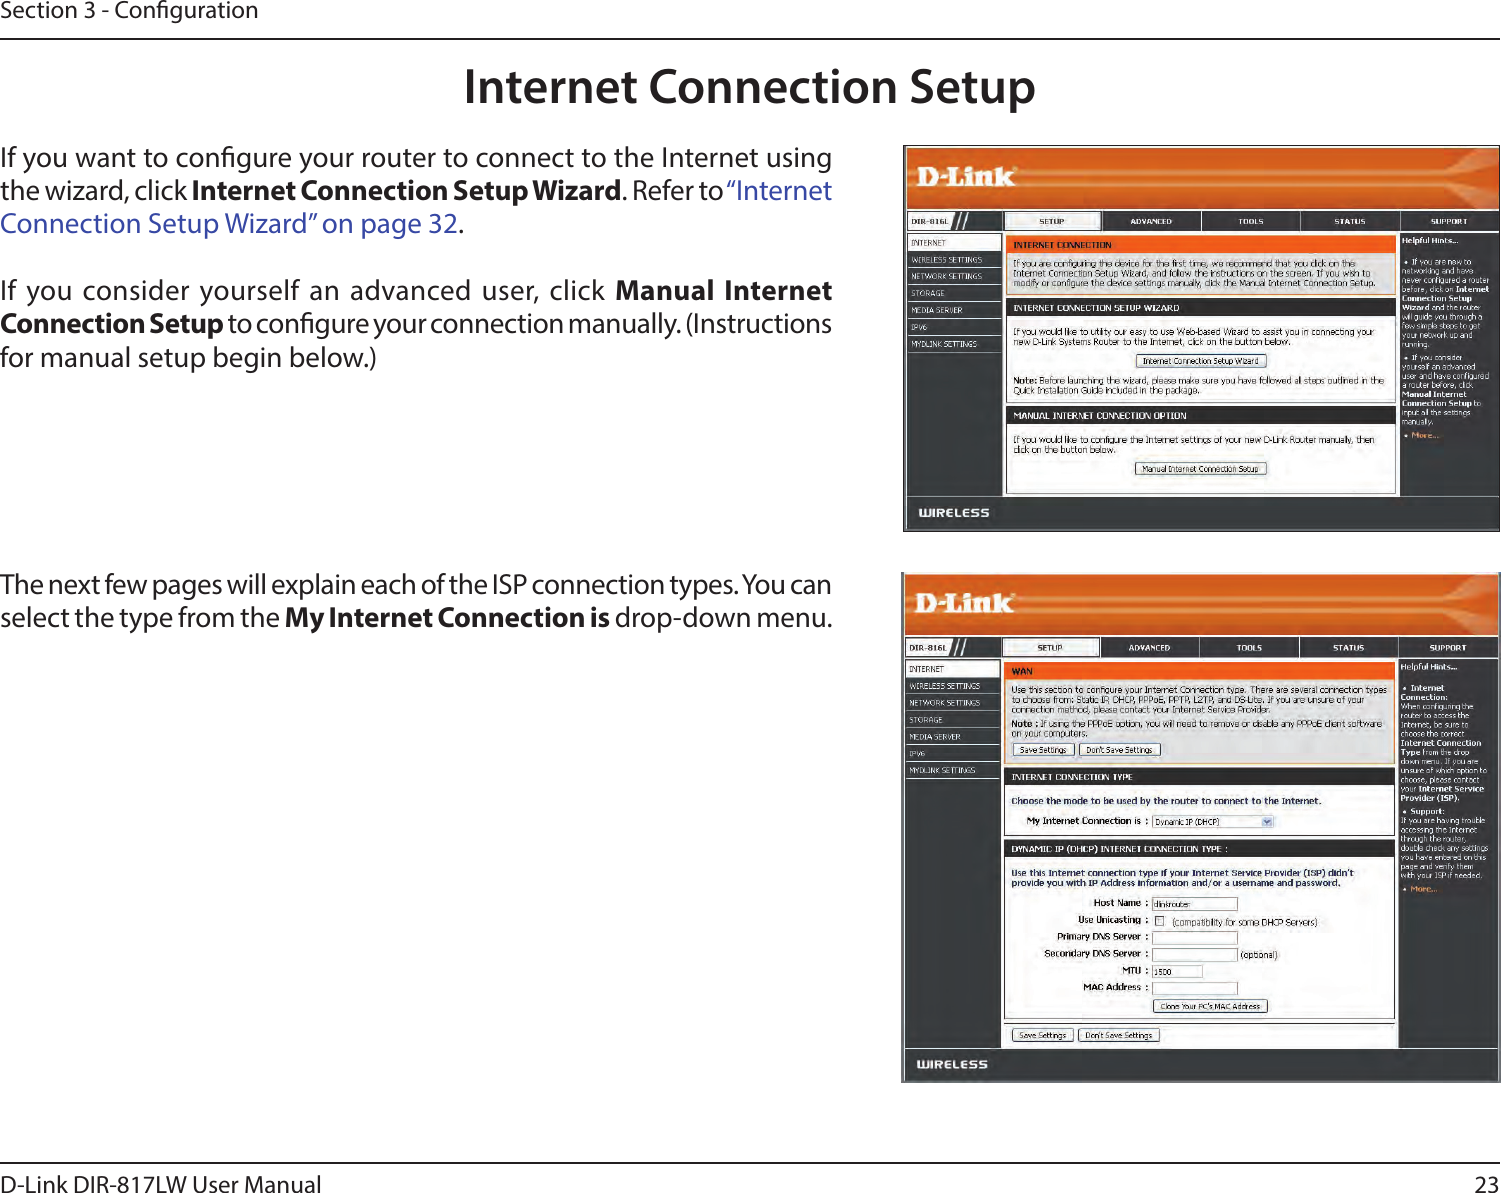 23D-Link DIR-817LW User ManualSection 3 - CongurationInternet Connection SetupIf you want to congure your router to connect to the Internet using the wizard, click Internet Connection Setup Wizard. Refer to “Internet Connection Setup Wizard” on page 32.If you consider yourself an advanced user, click  Manual Internet Connection Setup to congure your connection manually. (Instructions for manual setup begin below.)The next few pages will explain each of the ISP connection types. You can select the type from the My Internet Connection is drop-down menu.